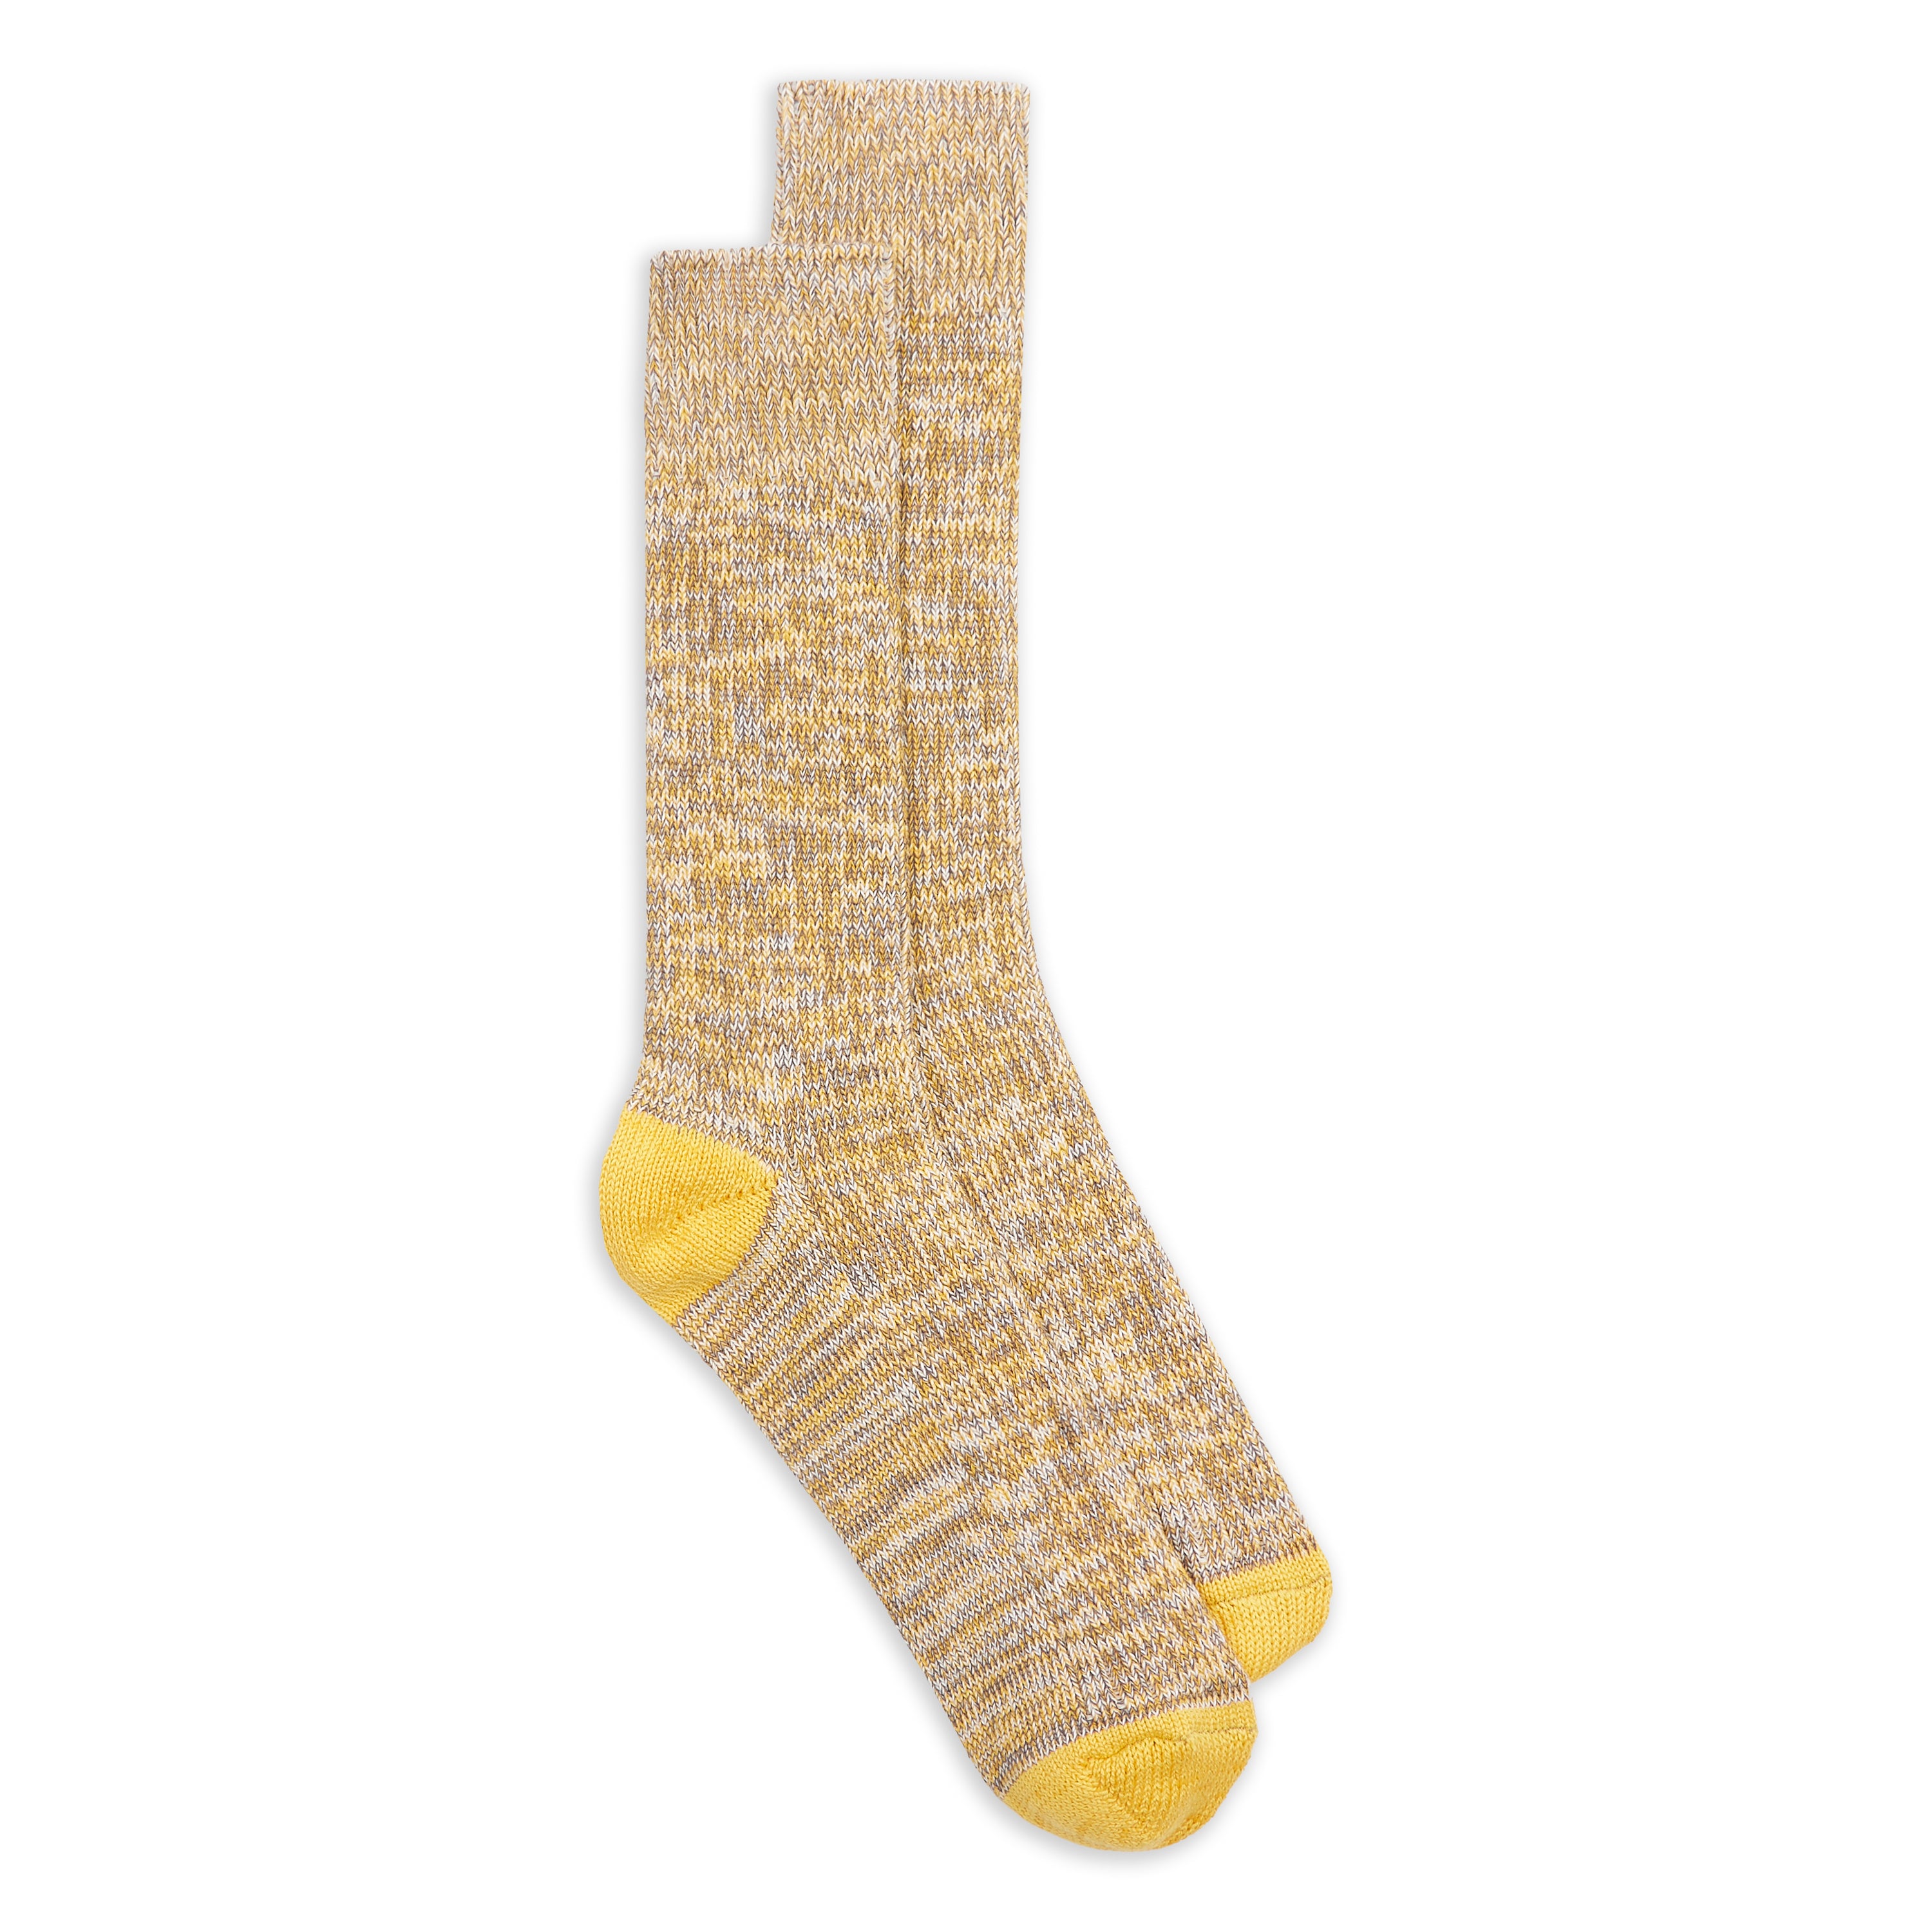 Burrows & Hare  Burrows And Hare Knitted Socks - Yellow & Grey